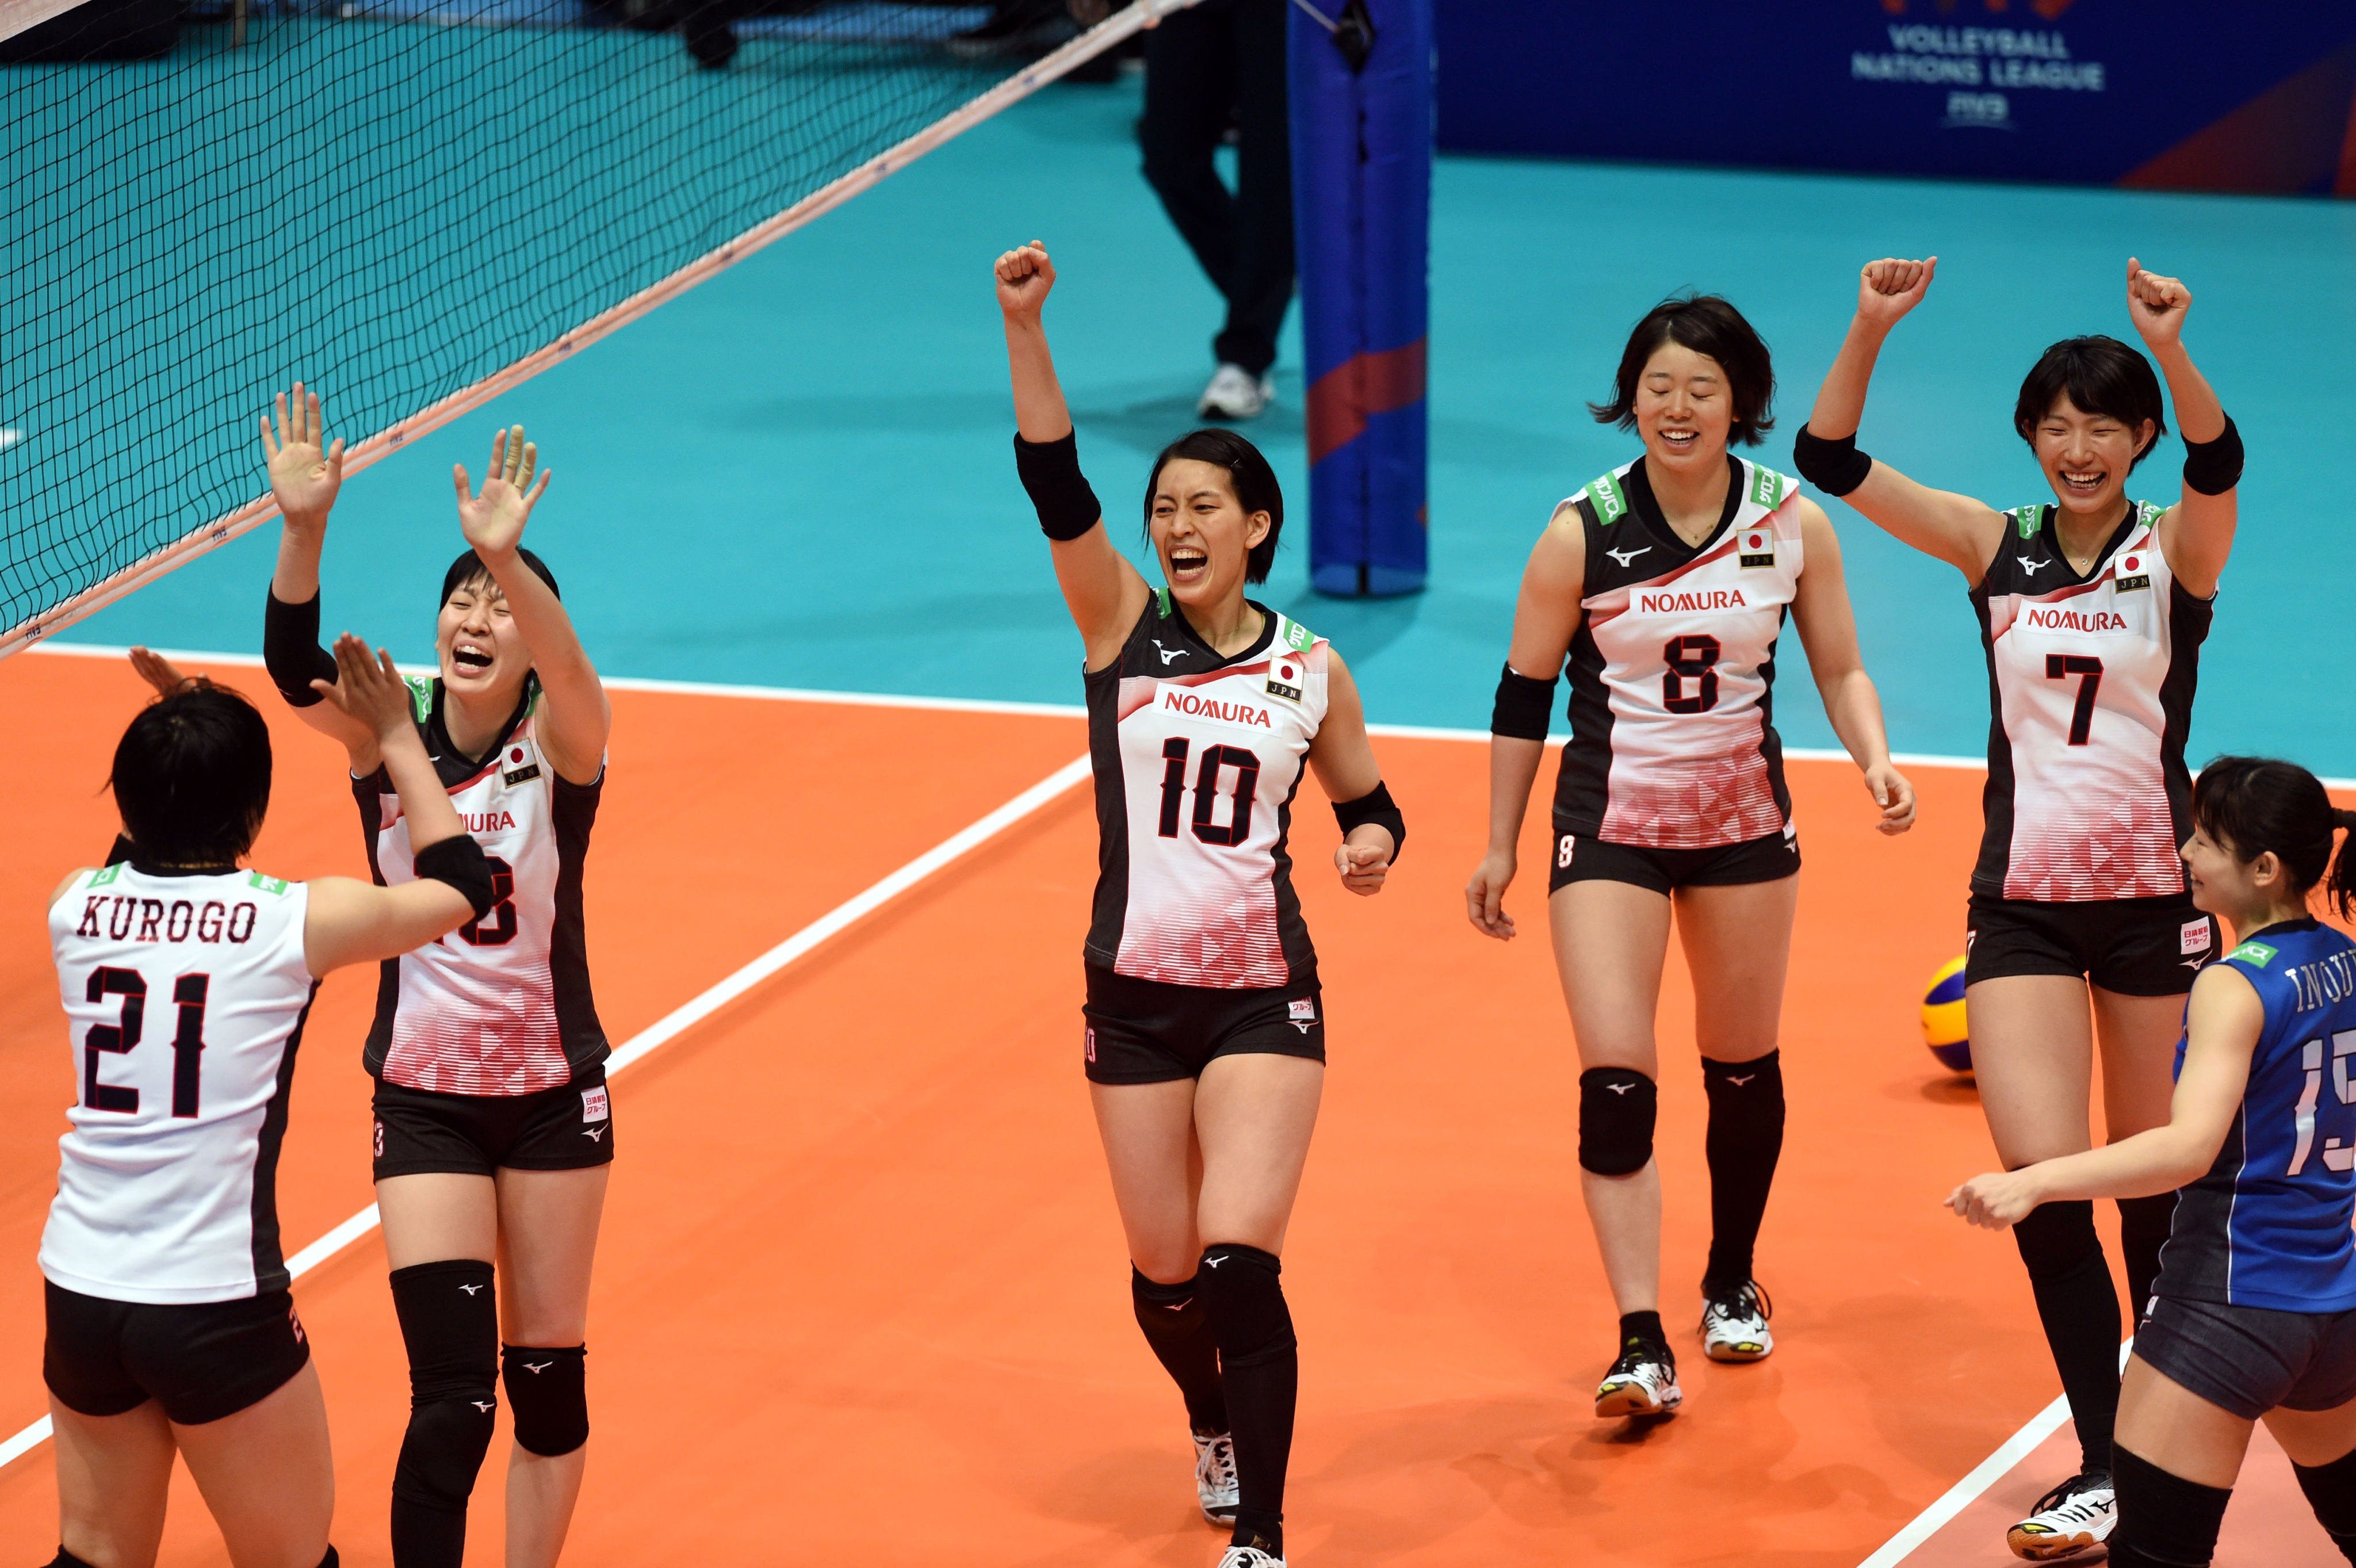 Japanese volleyball players will wear Olympic uniforms made of specialised fabric aimed at tackling voyeurism. Photo: Xinhua